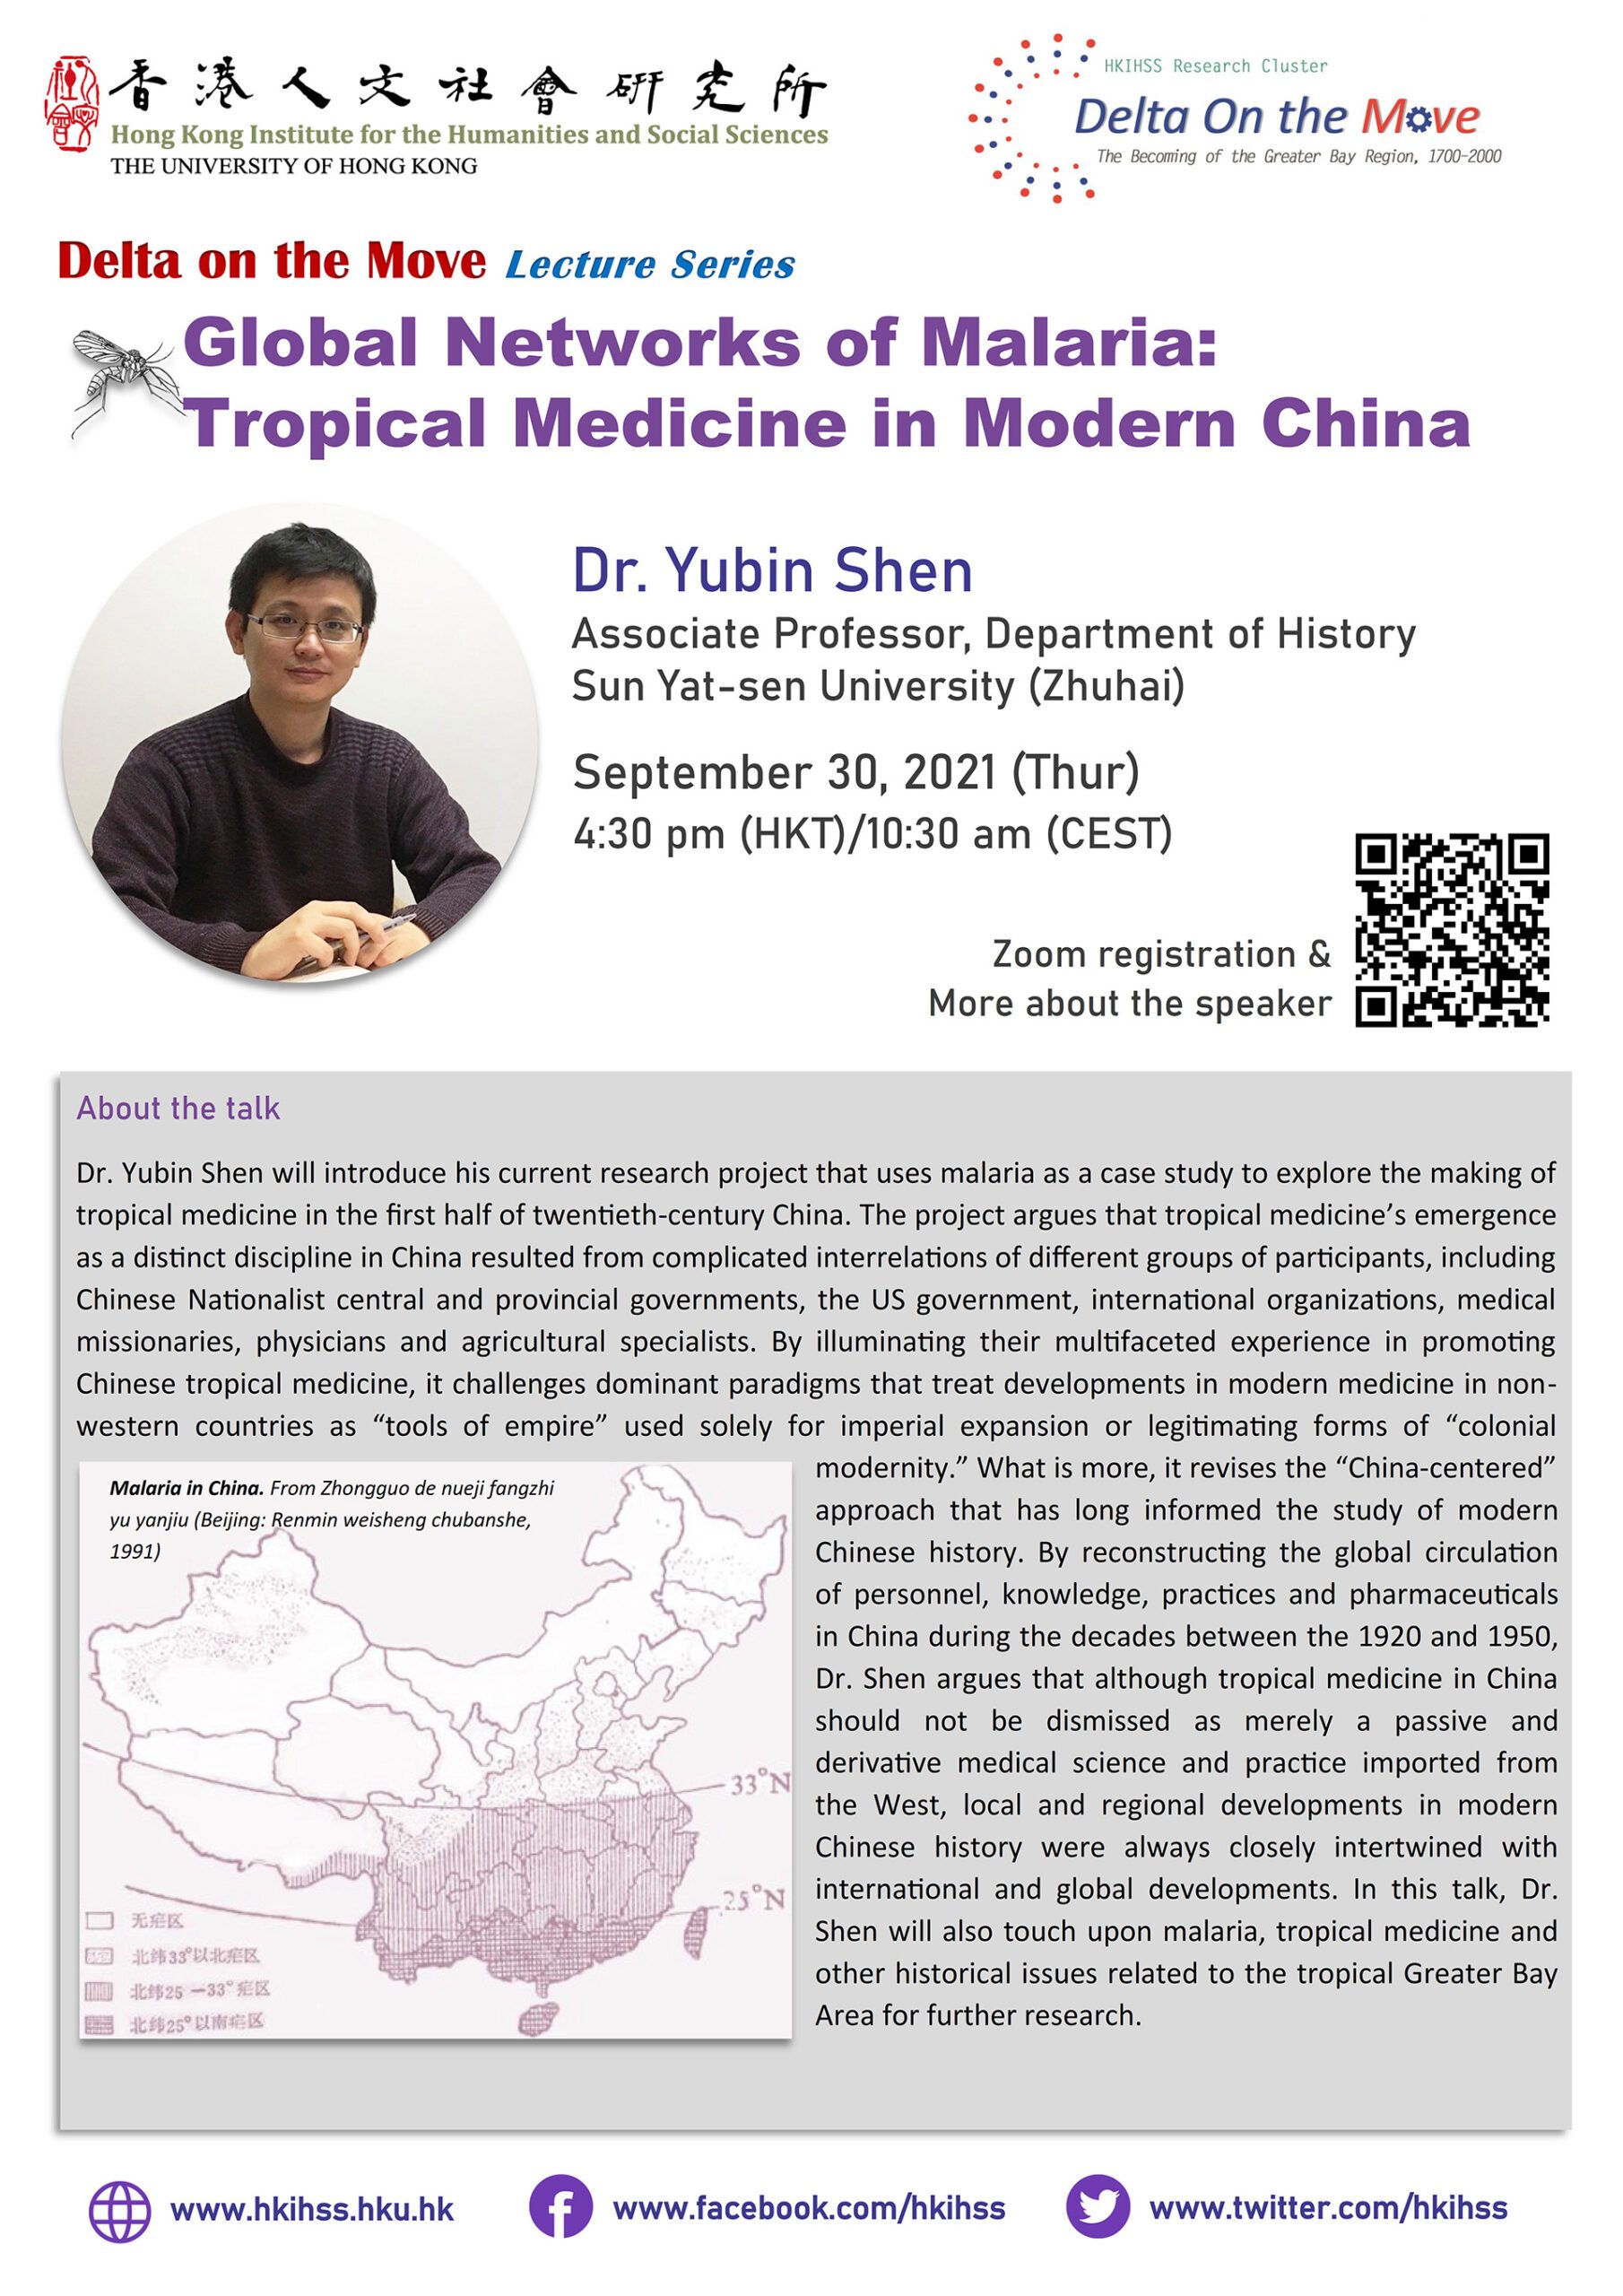 Delta on the Move Lecture Series “Global Networks of Malaria: Tropical Medicine in Modern China